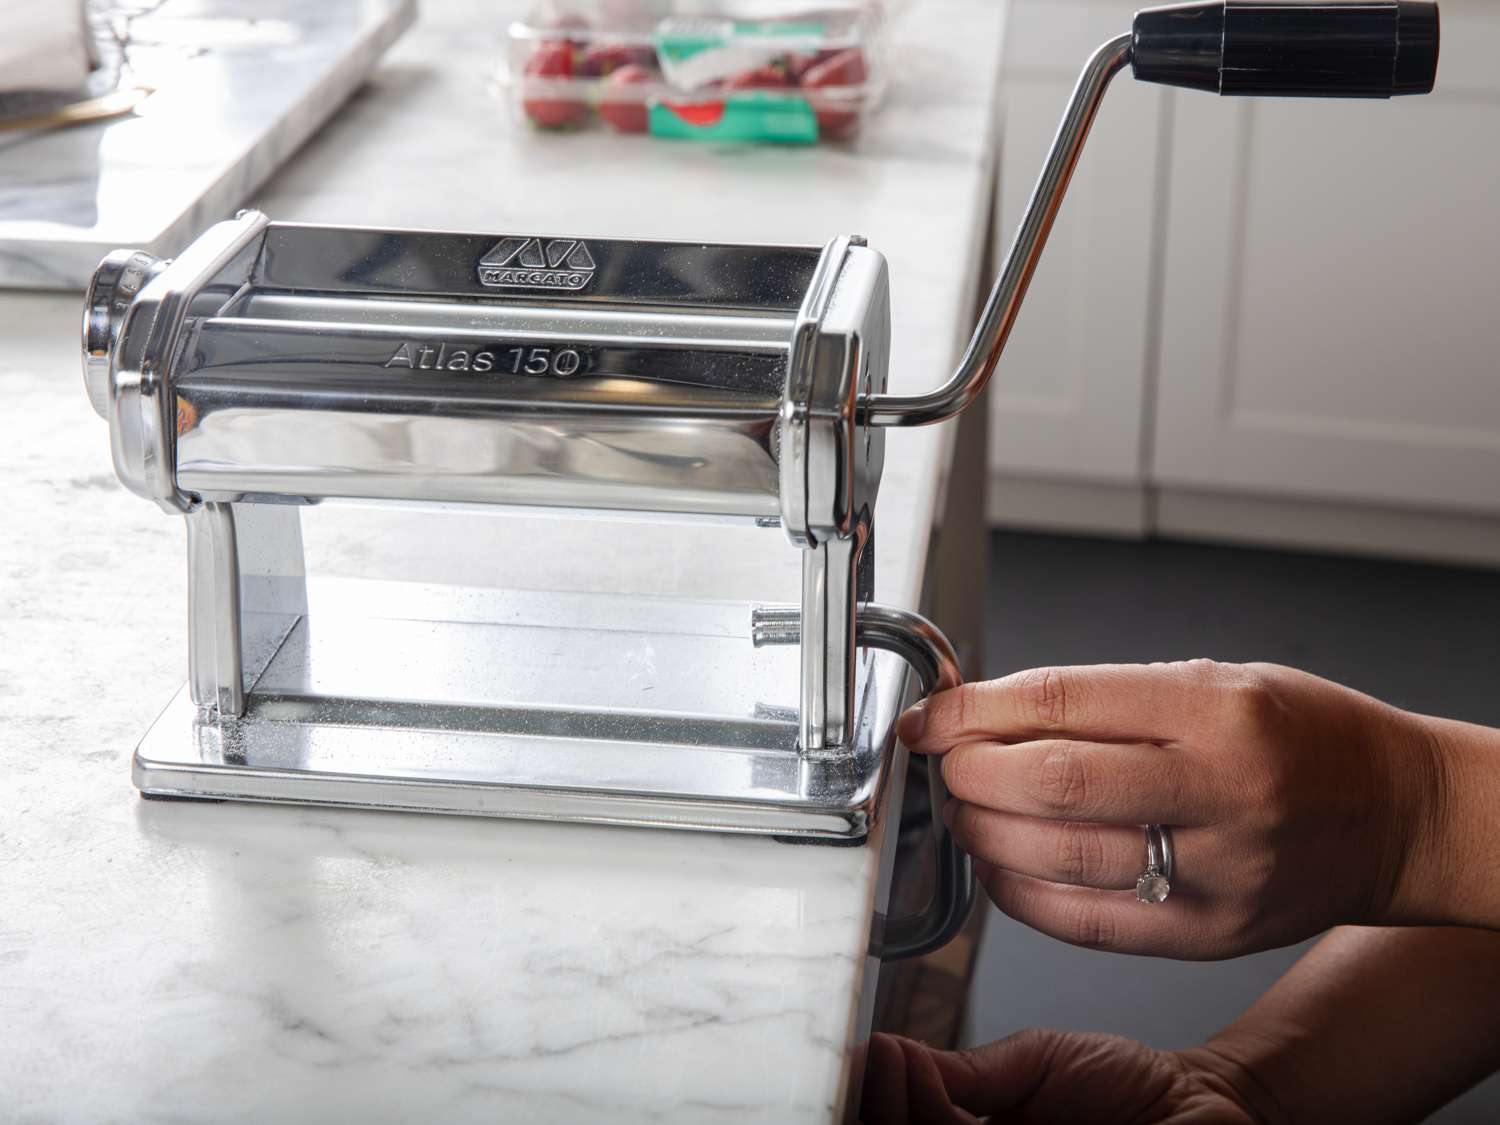 Two hands adjusting the clamp of a manual pasta maker on the side of a countertop